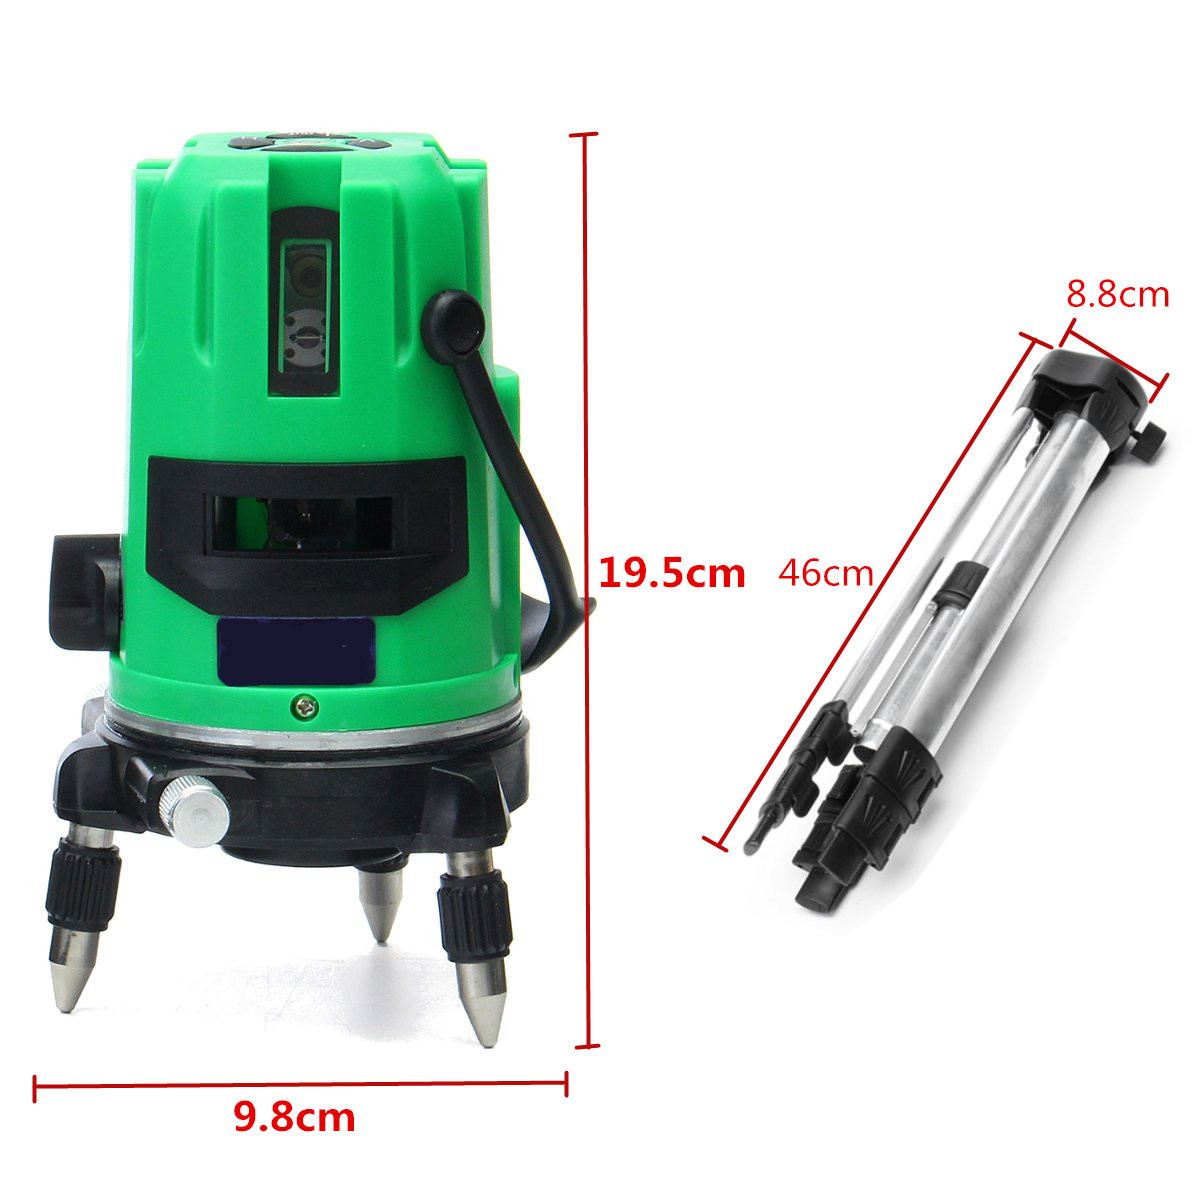 Green-3-Line-4-Points-Laser-Level-360-Rotary-Laser-Line-Self-Leveling-with-Tripod-1166737-9